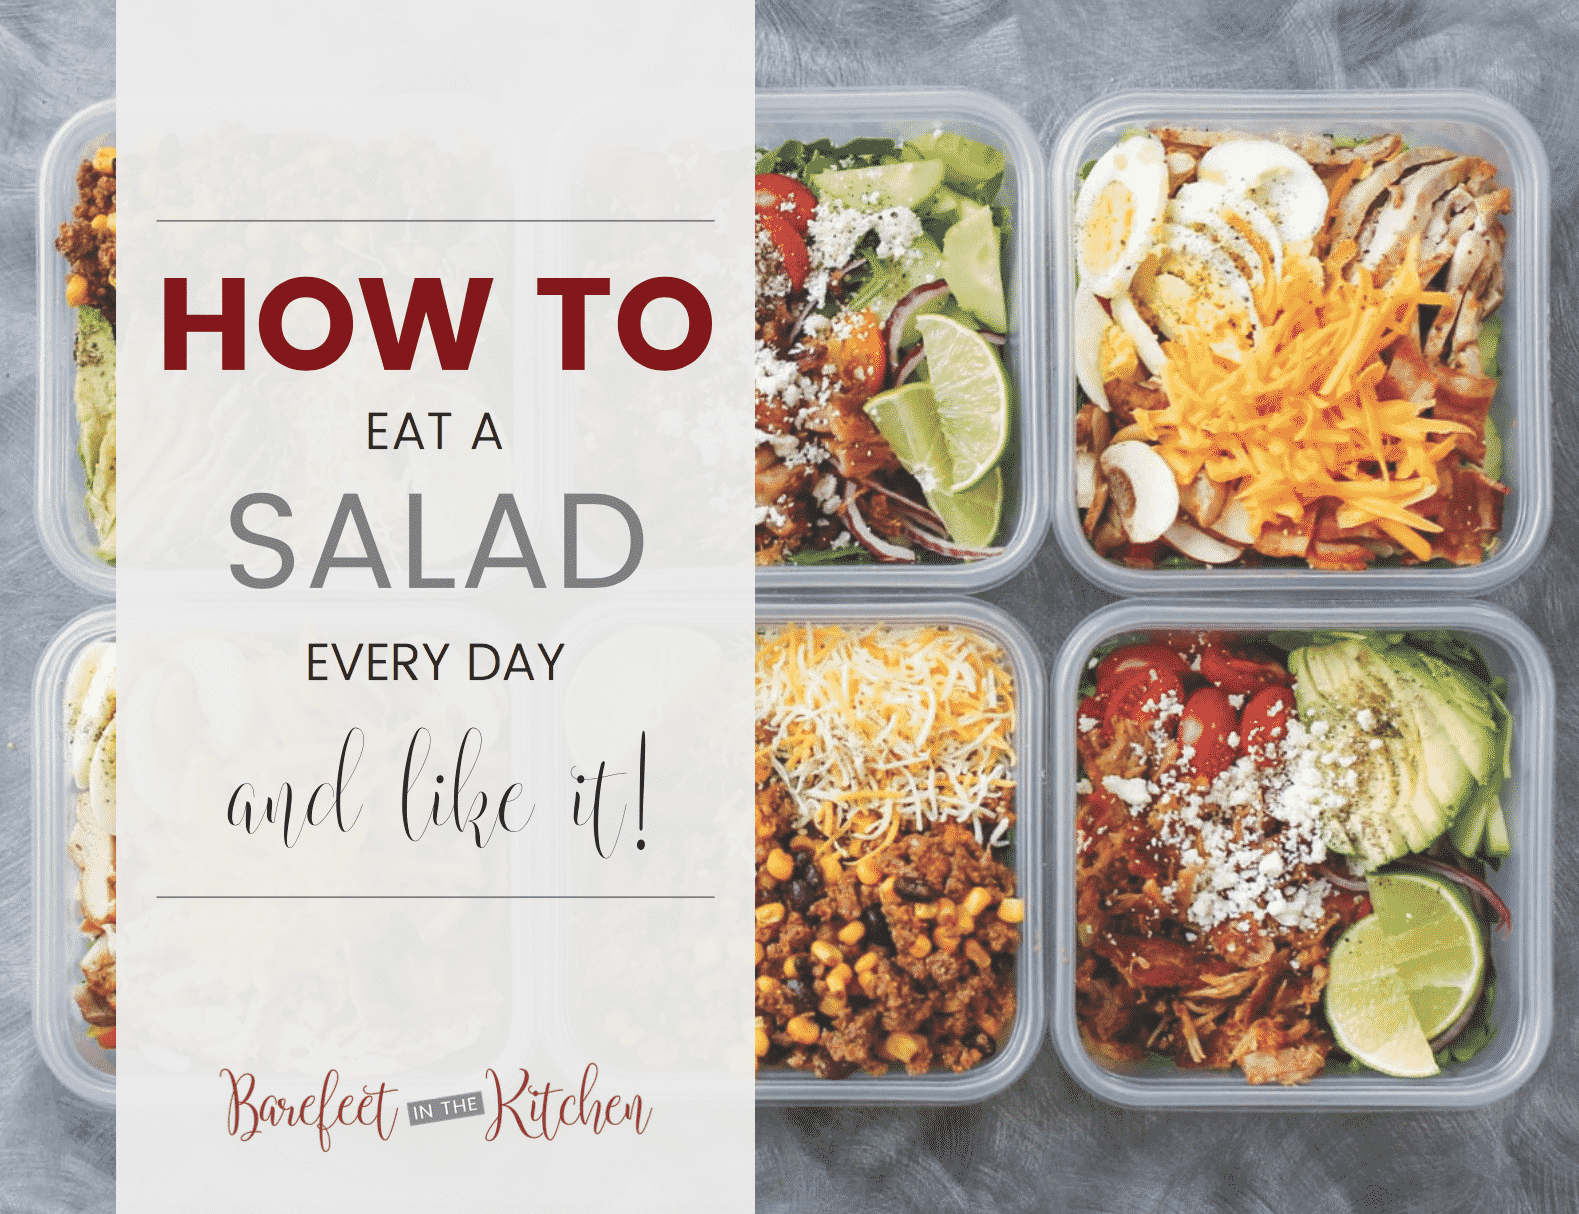 An eBook for How To Eat A Salad Every Day - Barefeet in the Kitchen